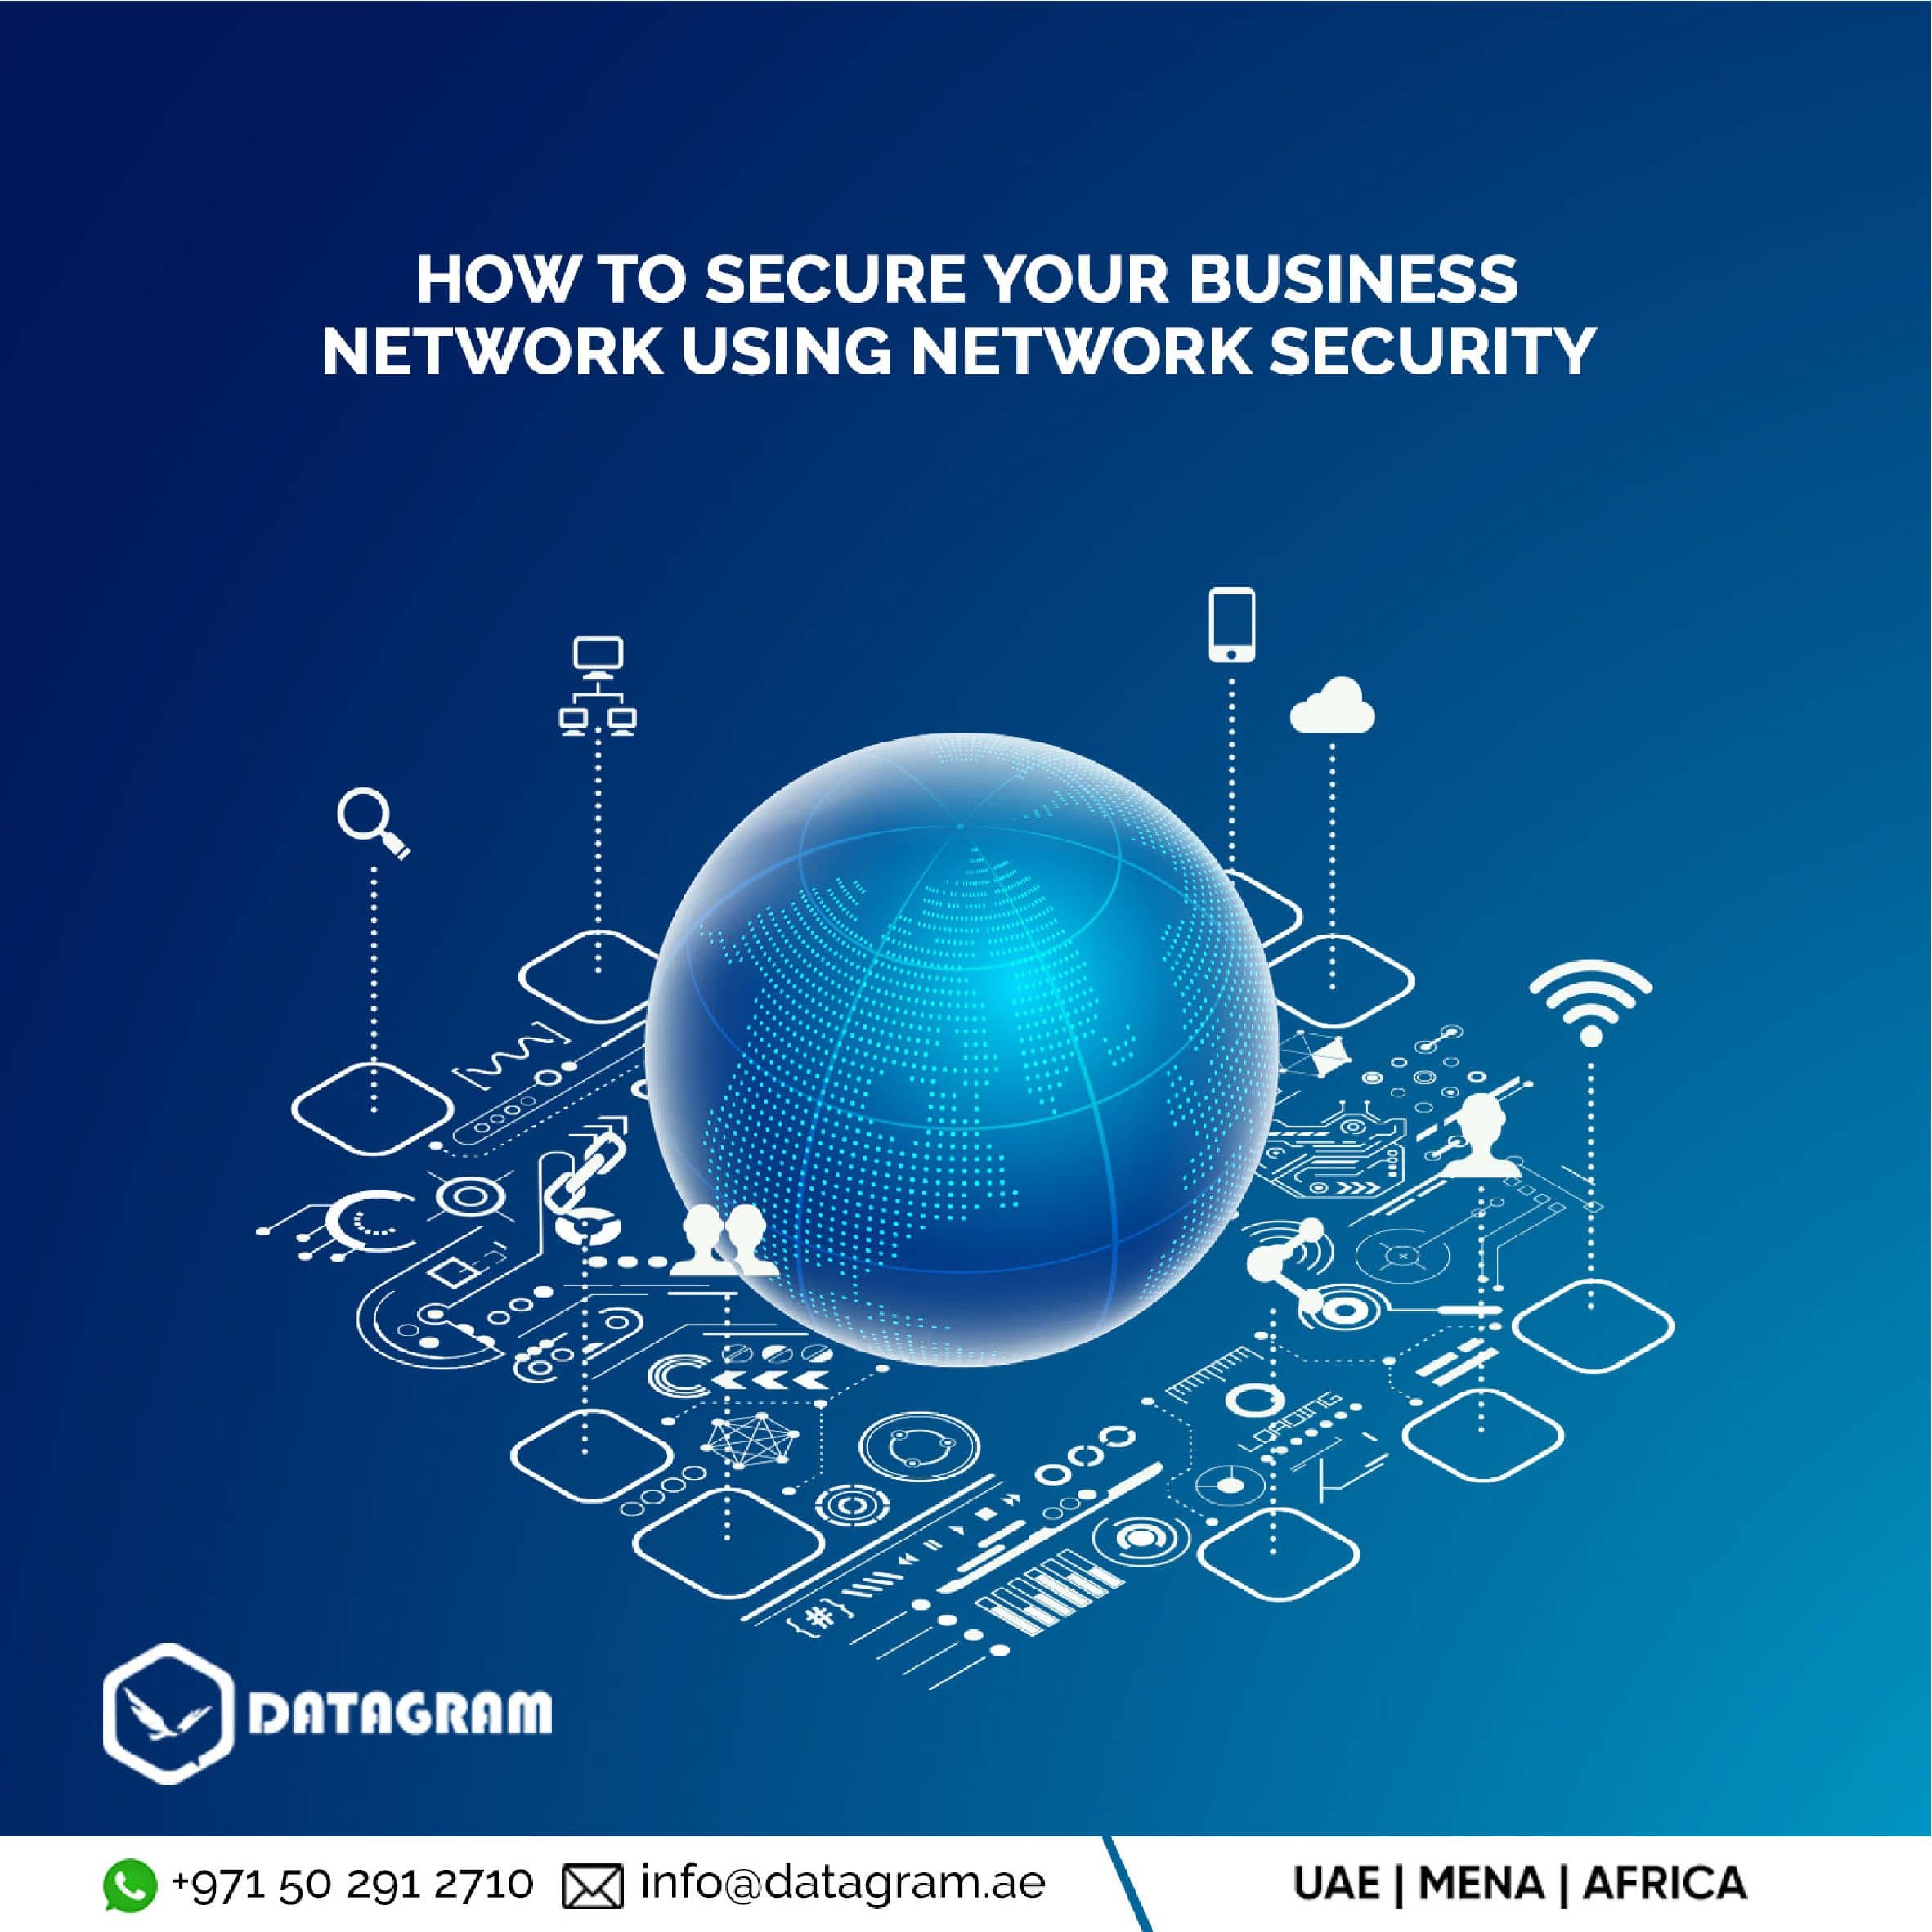 How to Secure Your Business Network Using Network Security?